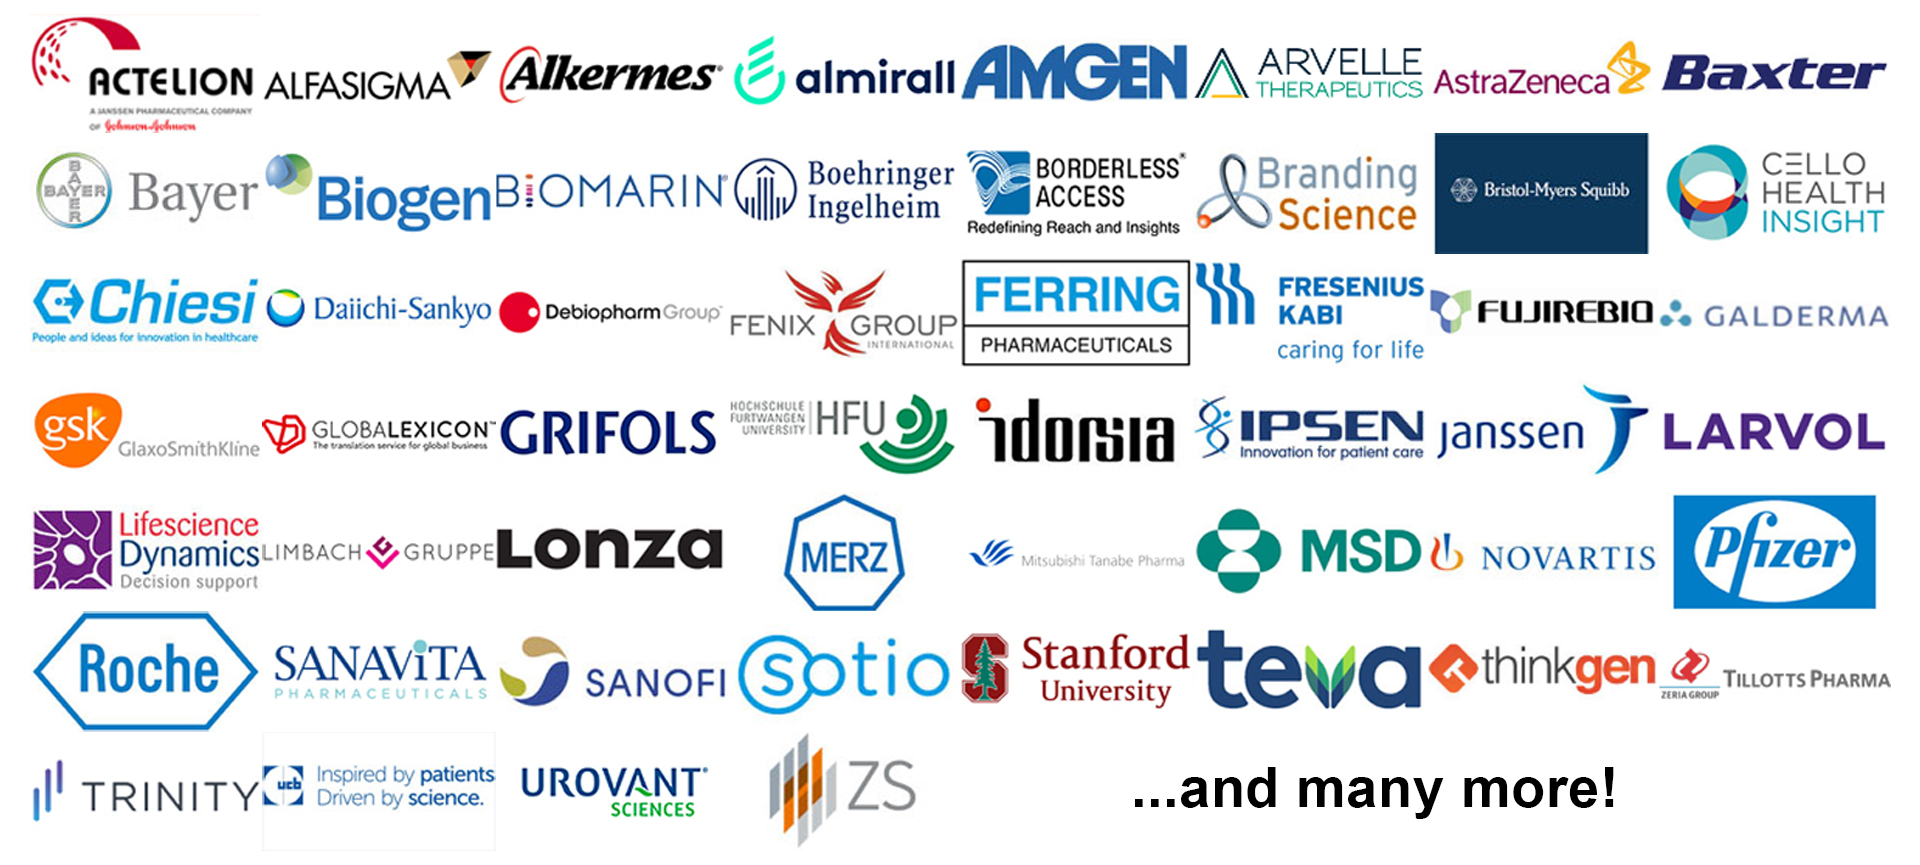 European Pharma Market Research Conference Attendees